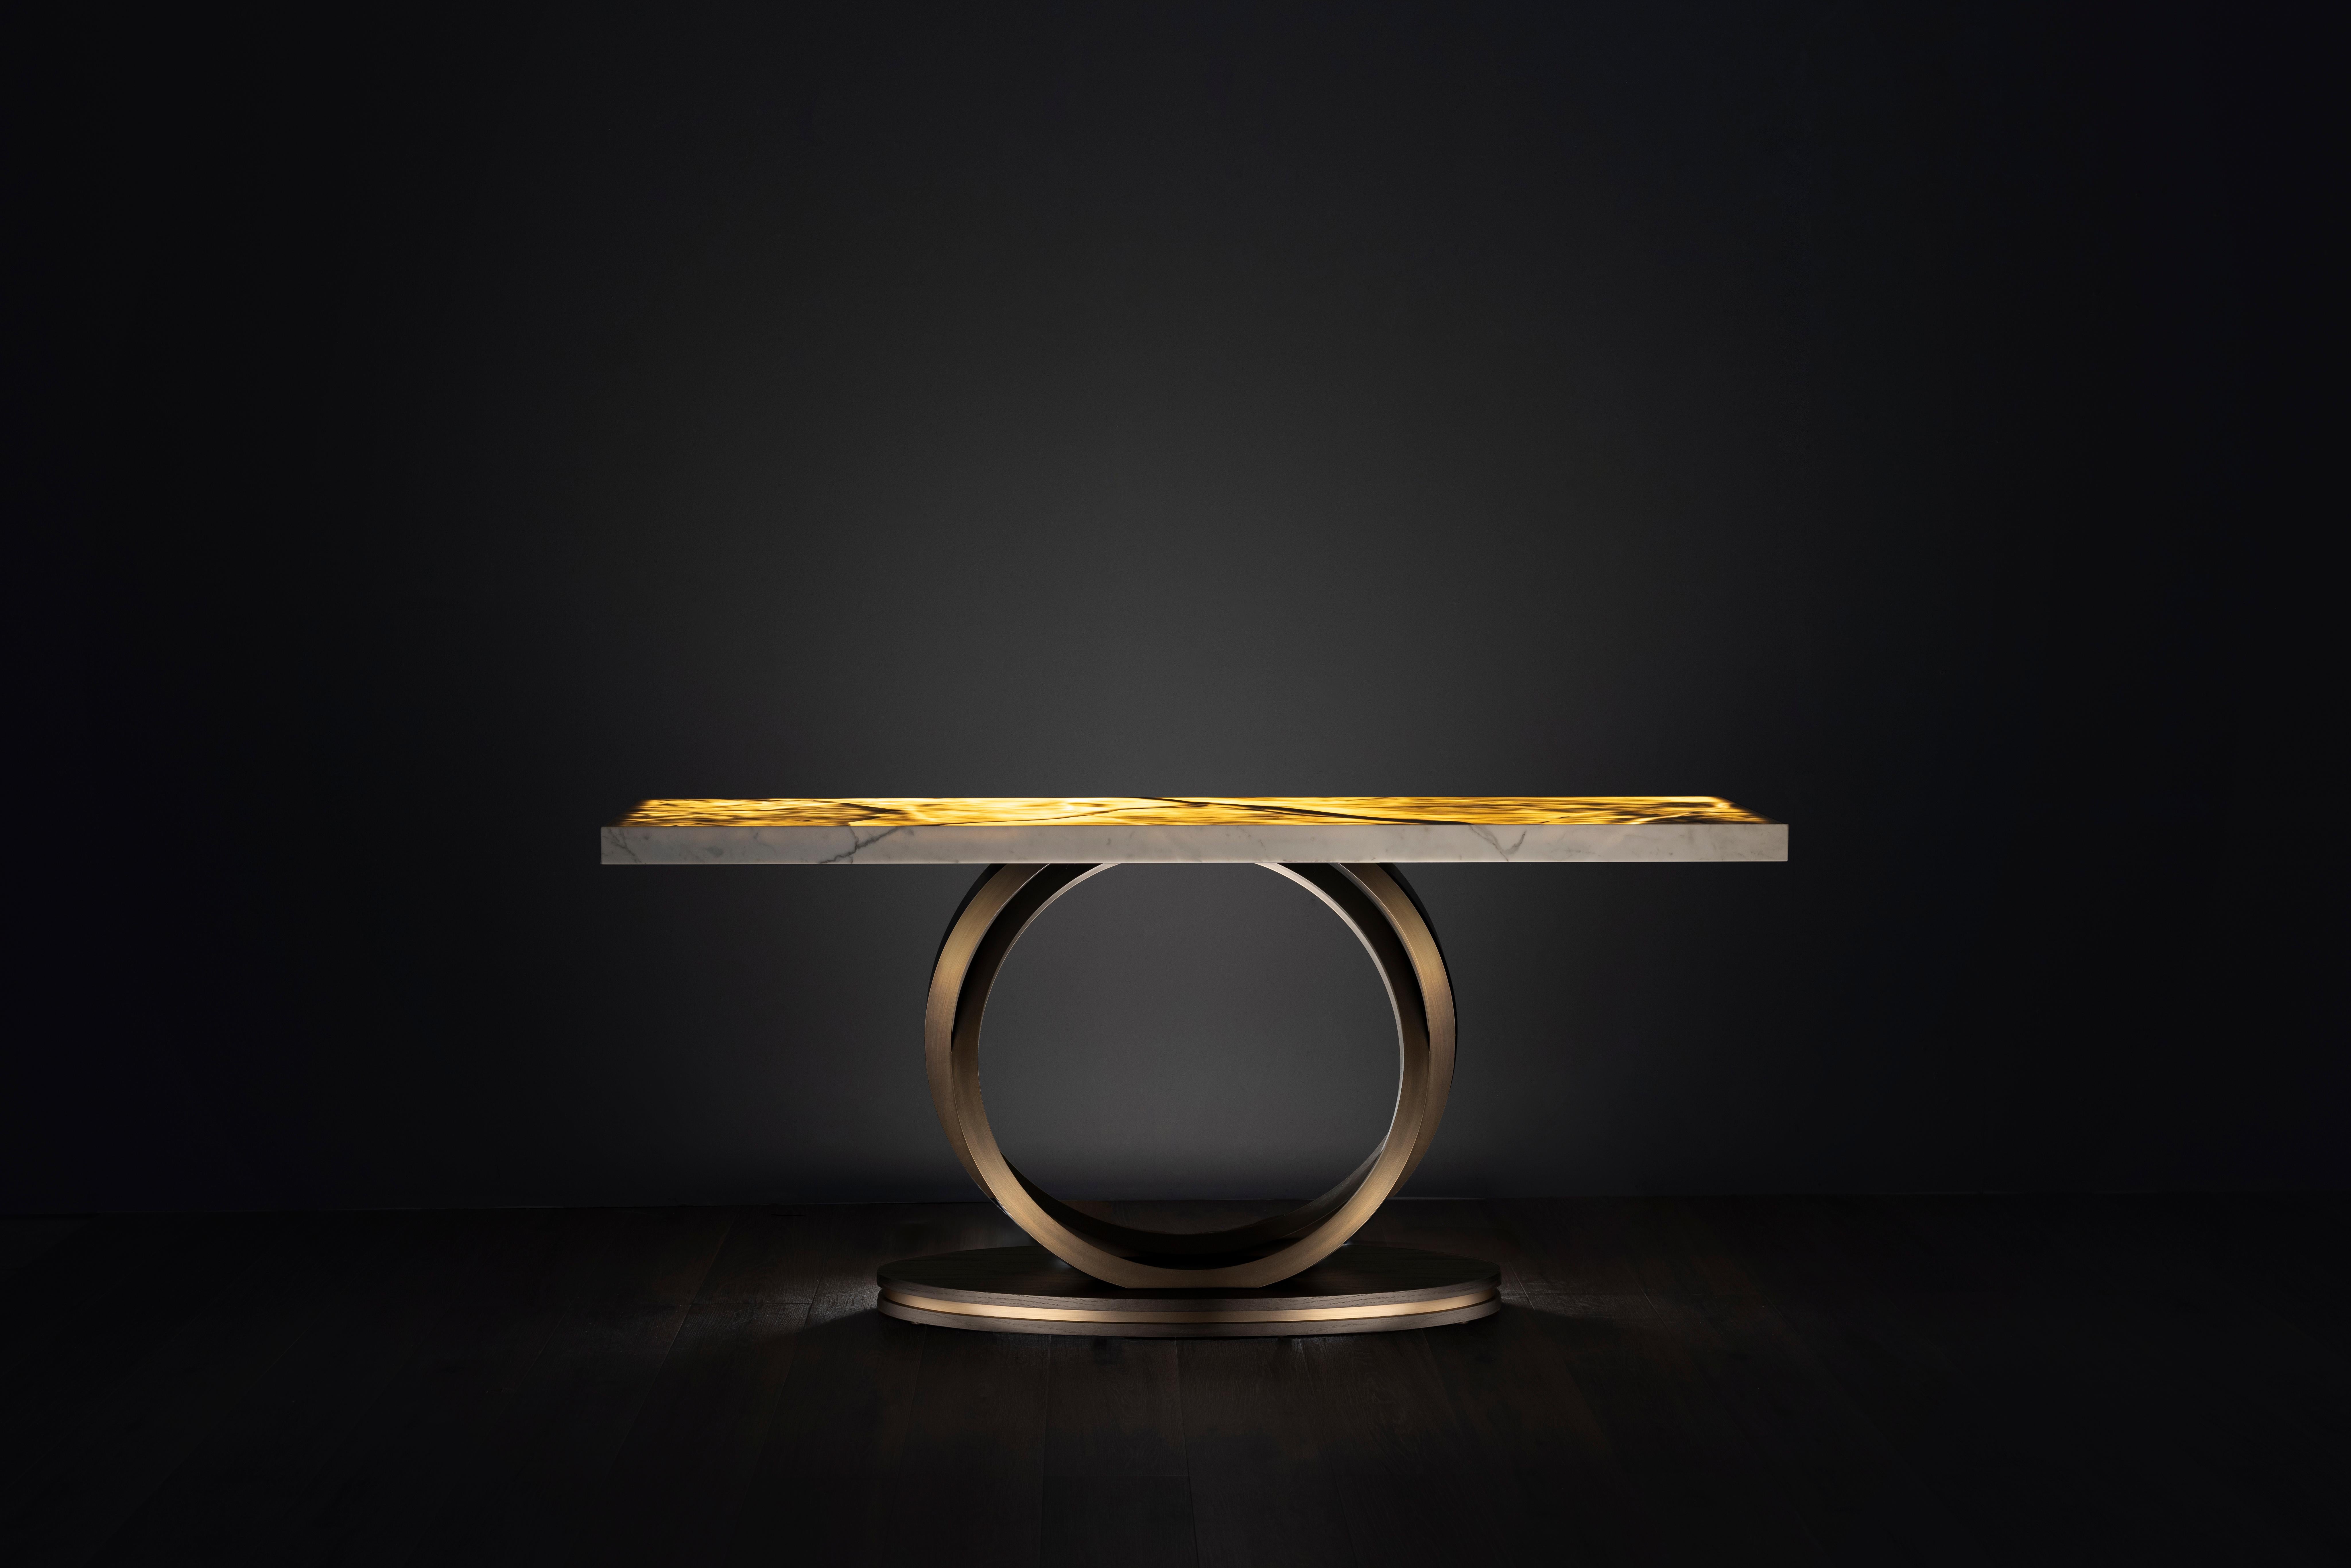 Armilar console table, Modern collection, handcrafted in Portugal - Europe by GF Modern.

The Armilar console table has a modern design that pays homage to the Portuguese armillary sphere, an instrument that allowed Portuguese navigators to sail